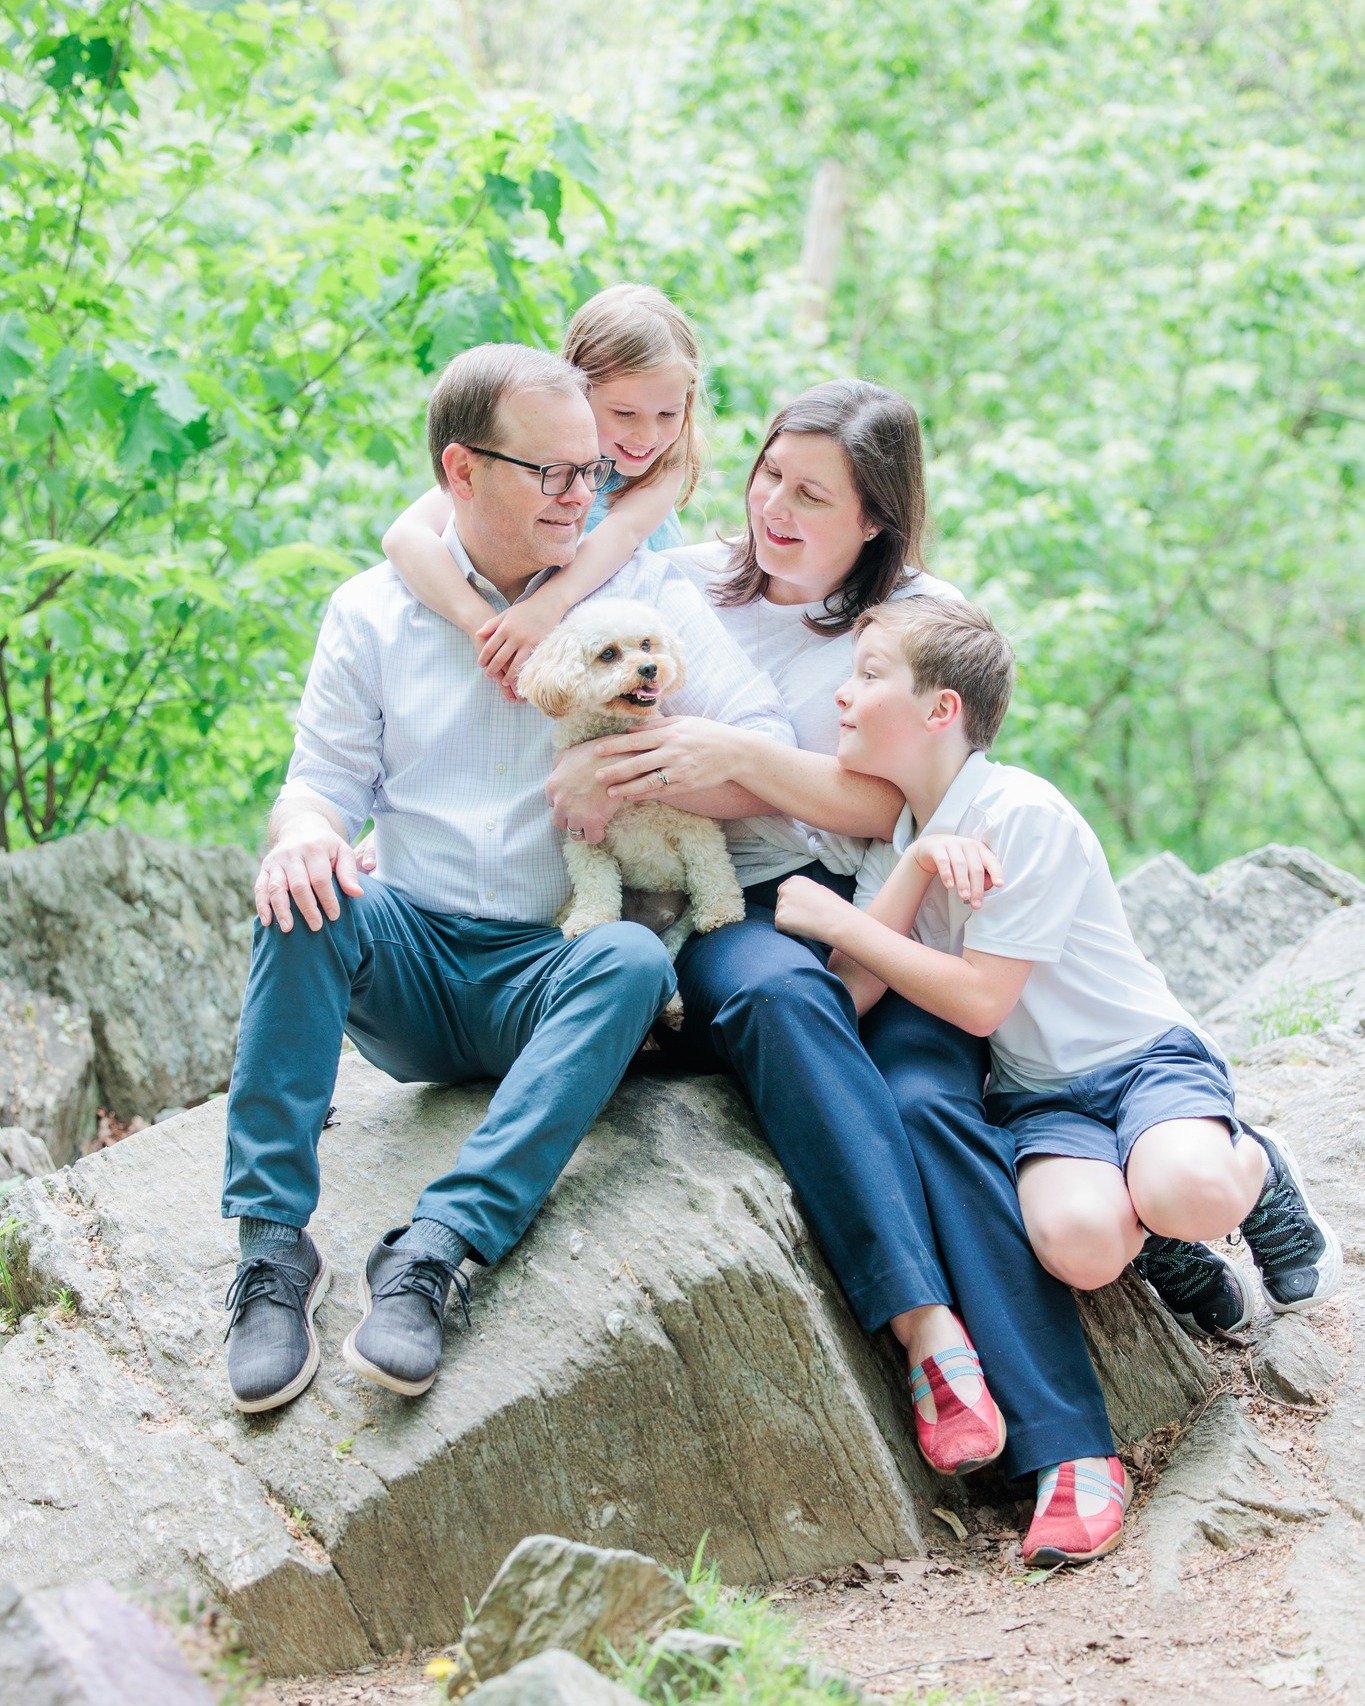 It's always nice when ALL the members of the family can get in on the family photo session- even the 4 legged ones! 

.
.
.
.
.
#ginnyfilerphotography #gfpfamilies #familyphotography #dmvfamilyphotographer #marylandfamilyphotographer #kids #blessing 